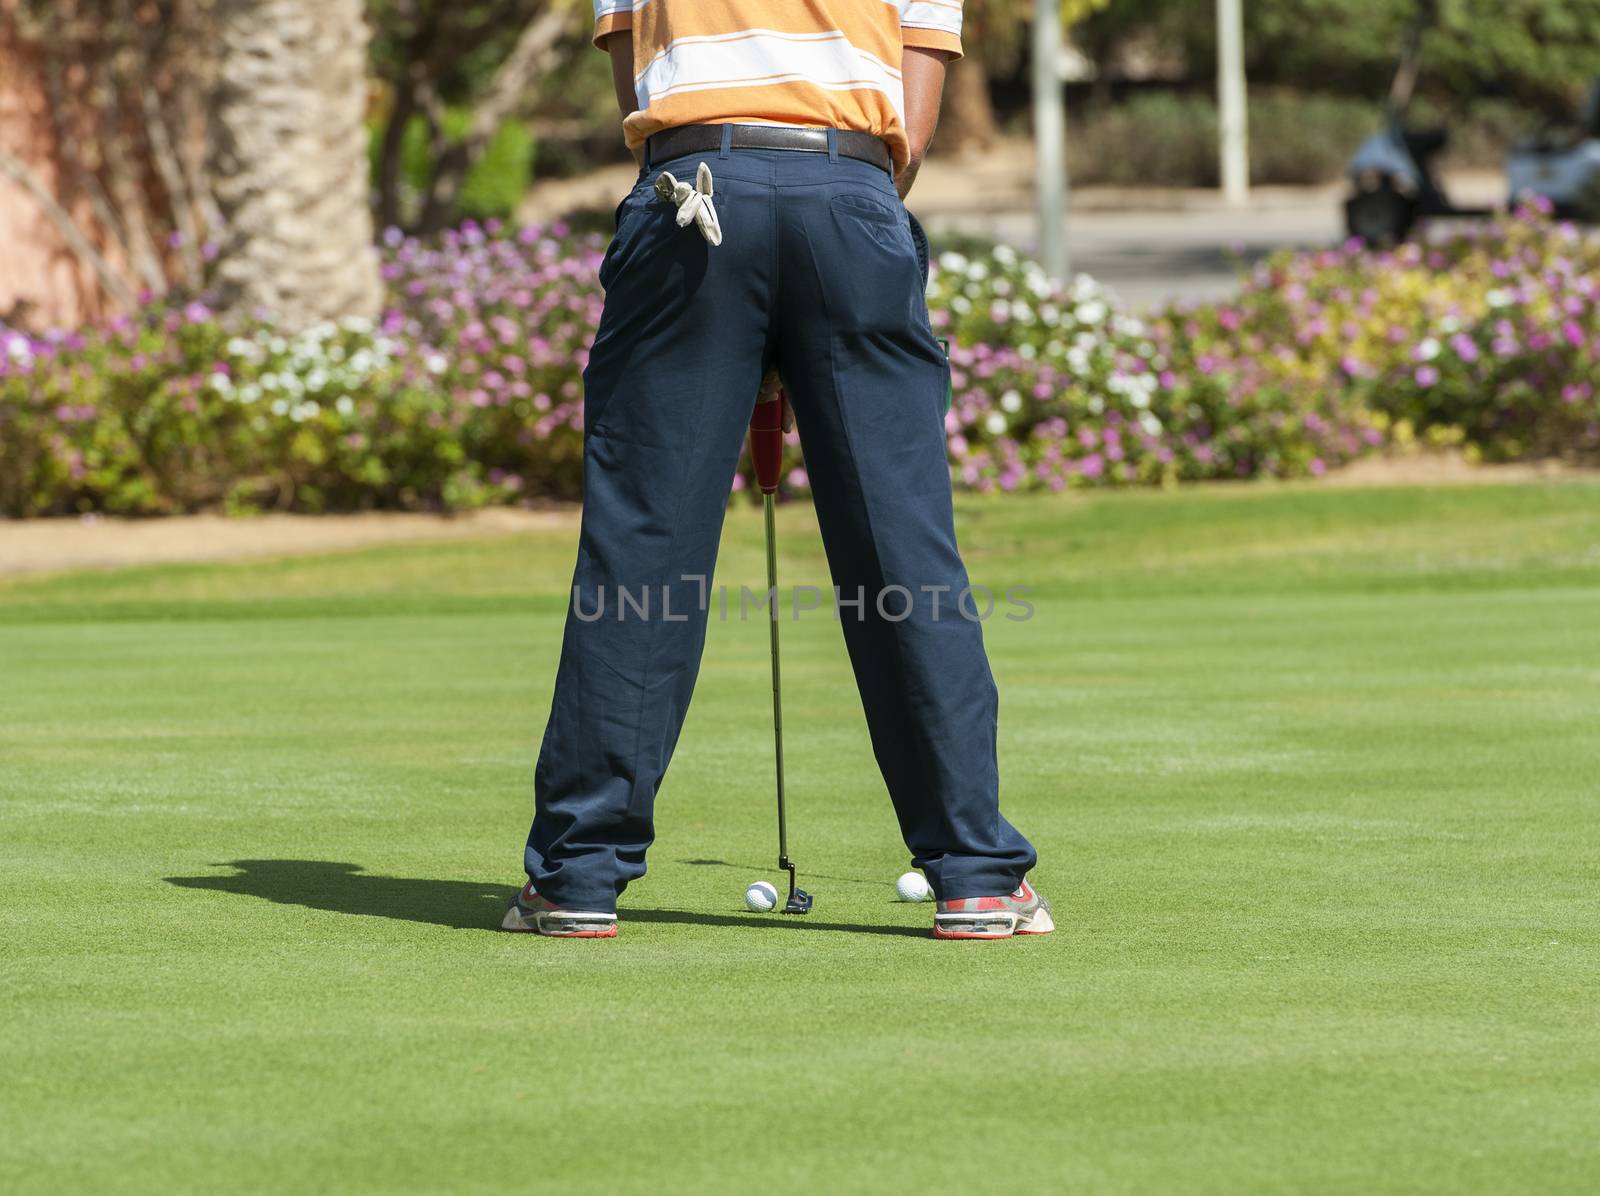 Male golfer on a practice putting green